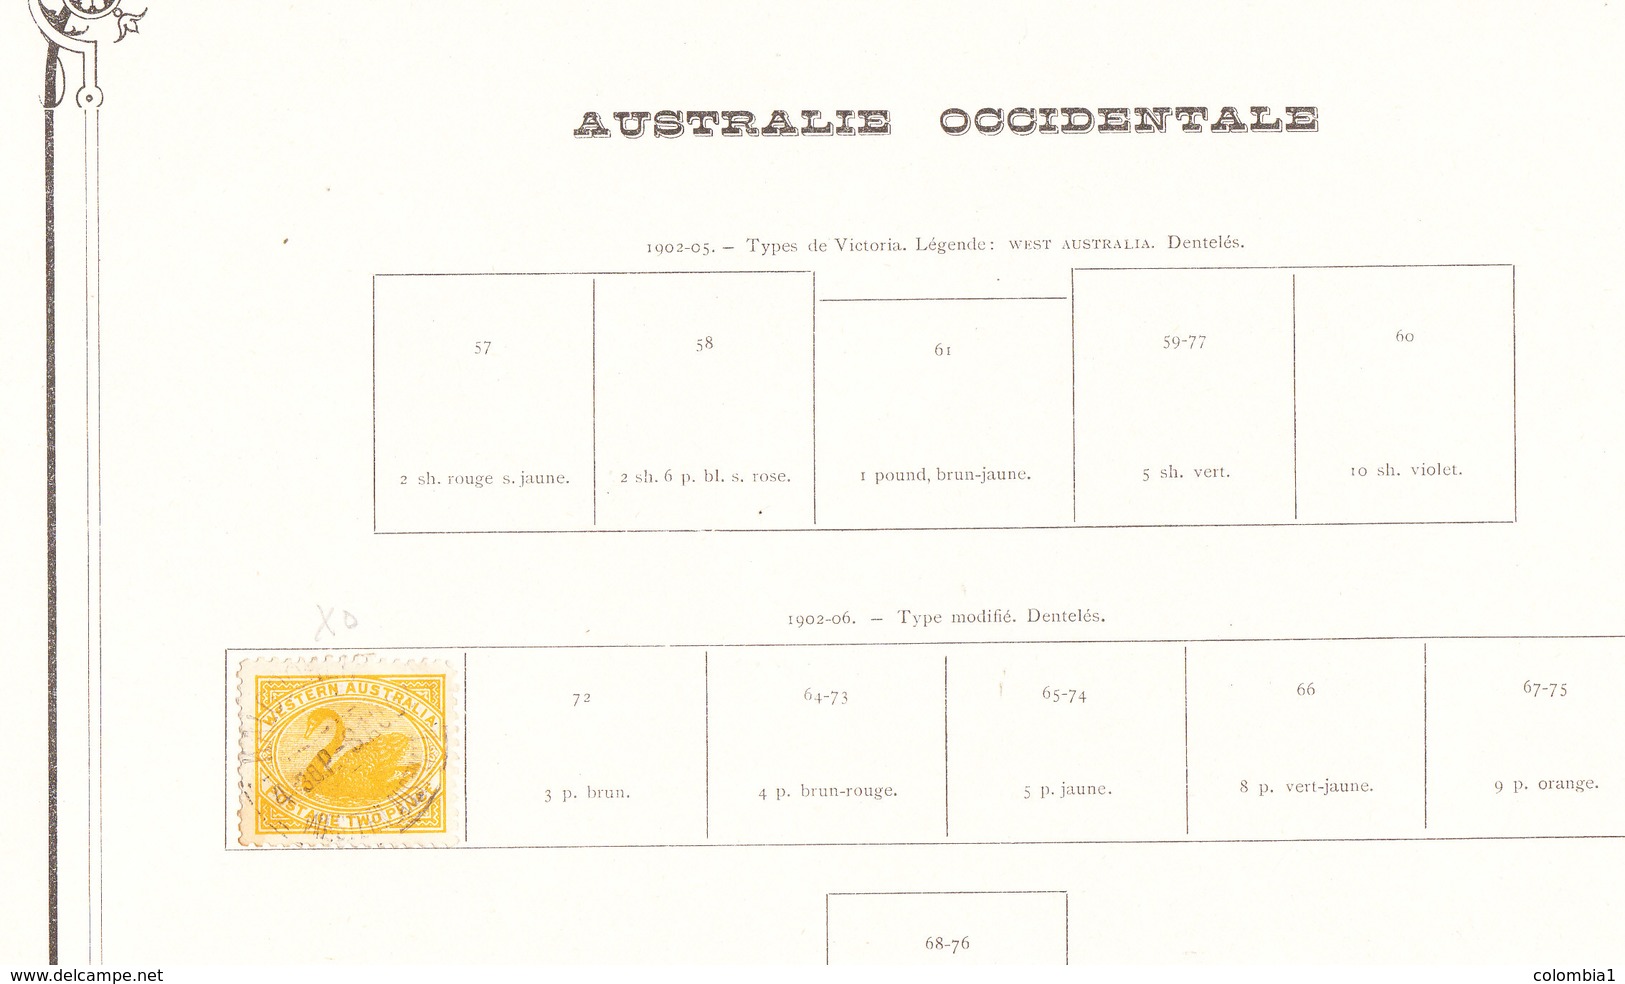 AUSTRALIE Occidentale Timbres Sur Feuille D Album - Used Stamps